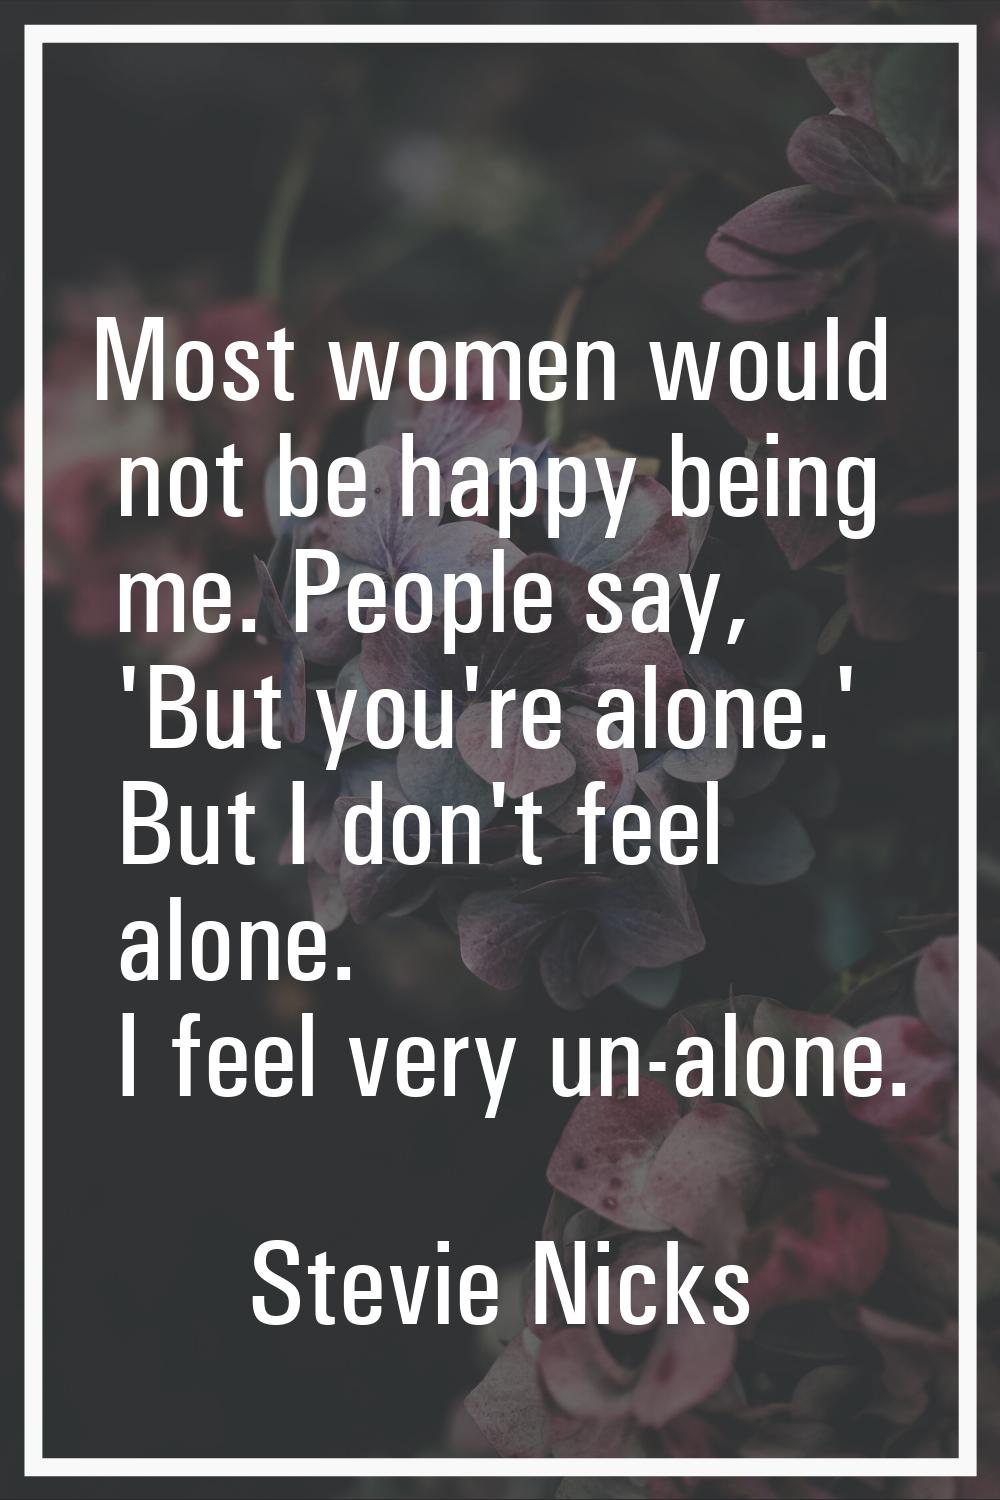 Most women would not be happy being me. People say, 'But you're alone.' But I don't feel alone. I f